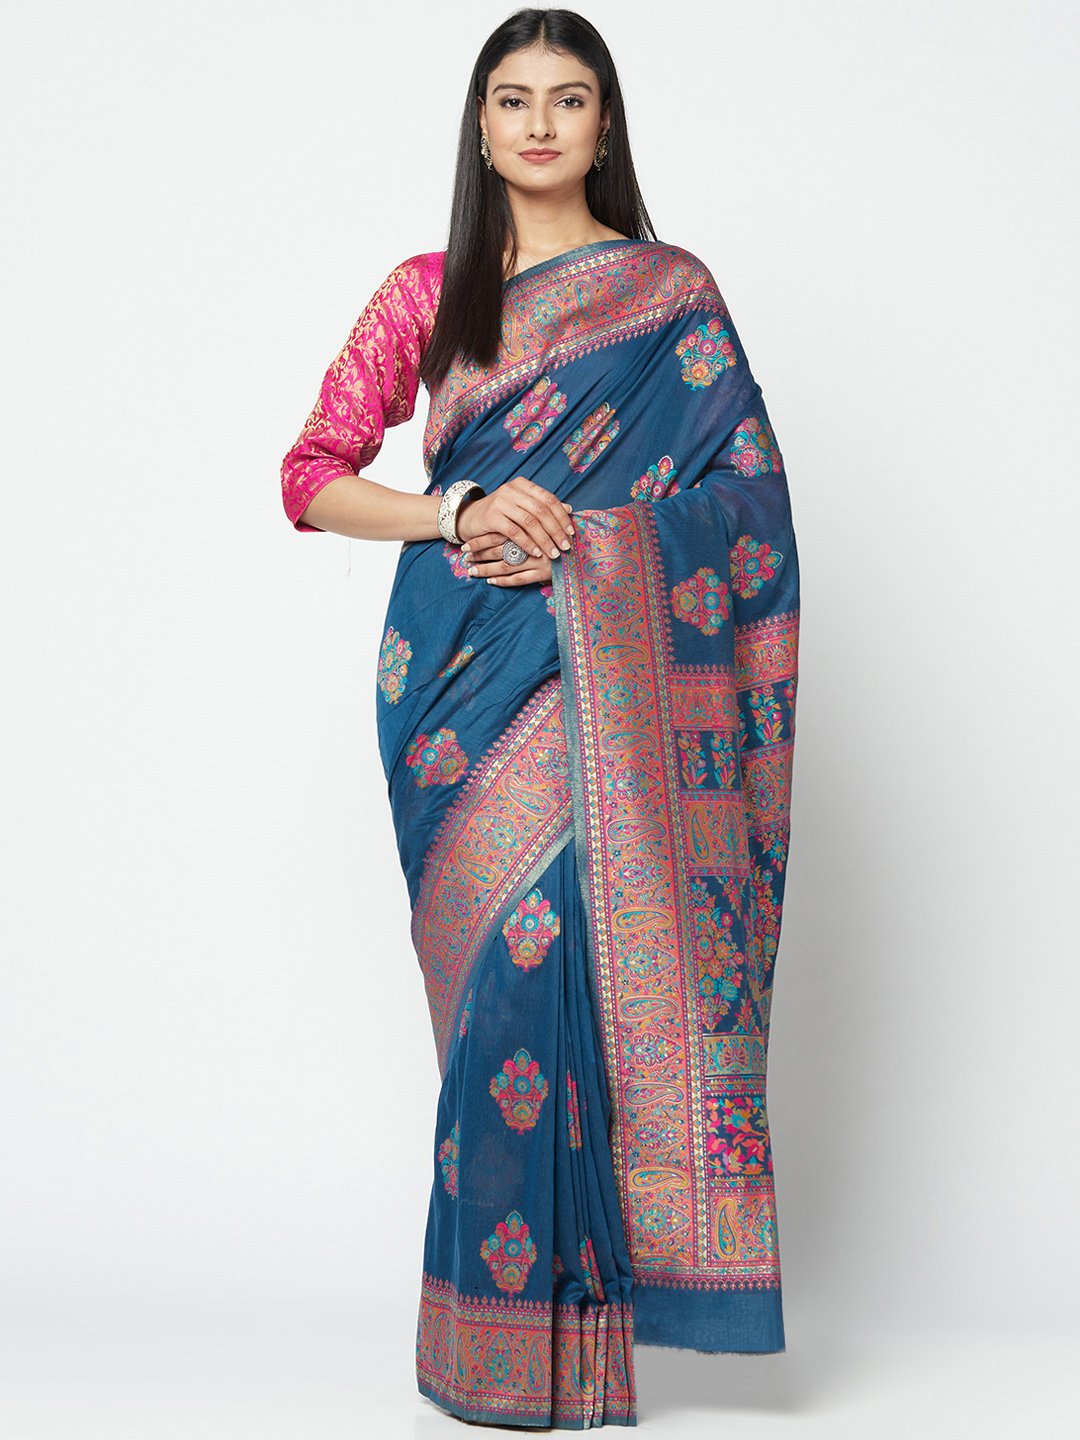 Shop Blue Handloom Saree For Party Wear which is Saree online at simaaya At